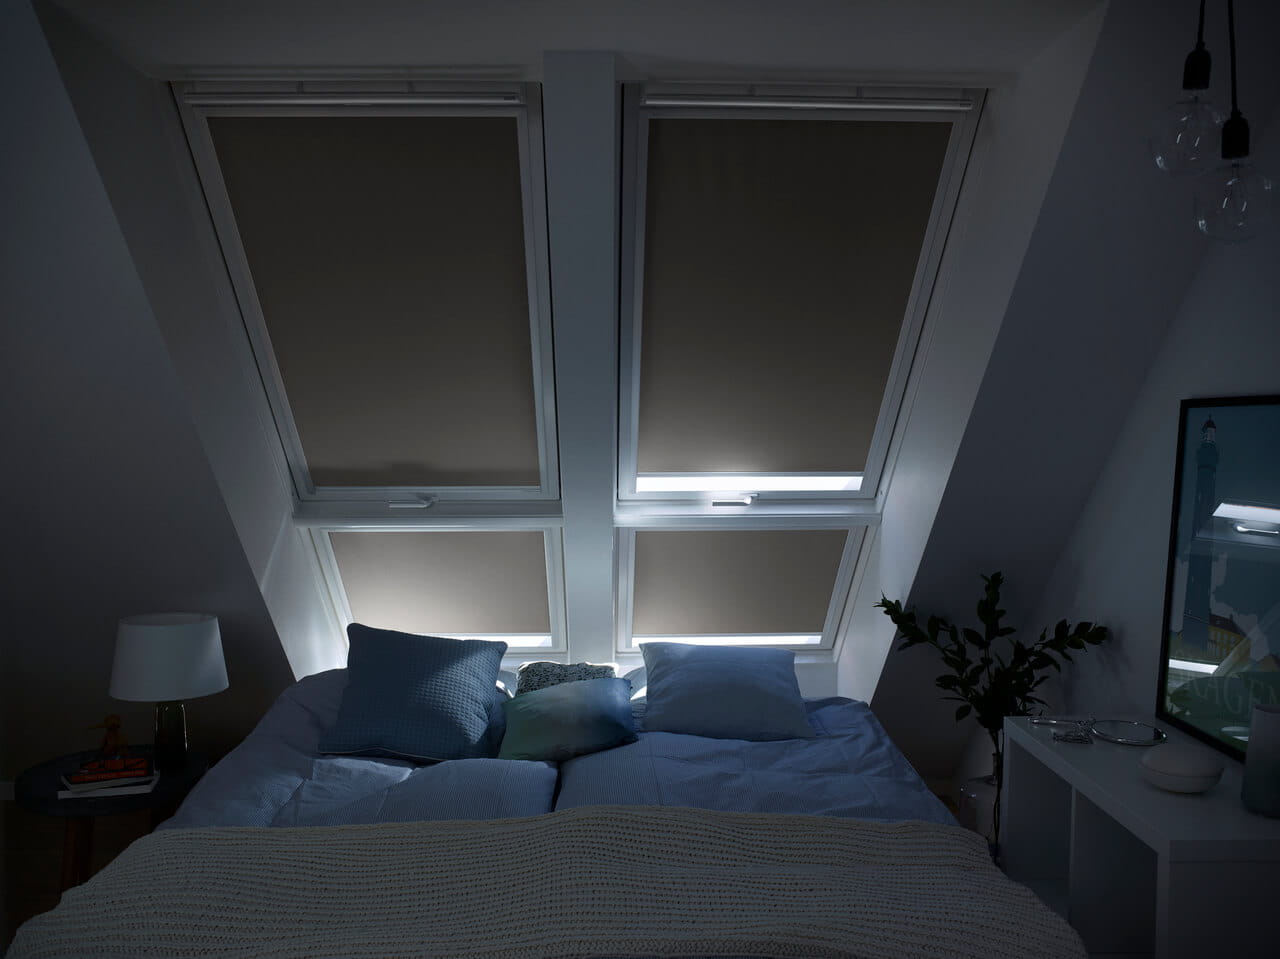 Image of almost completely drawn VELUX blackout blinds which effectively keep out the light.